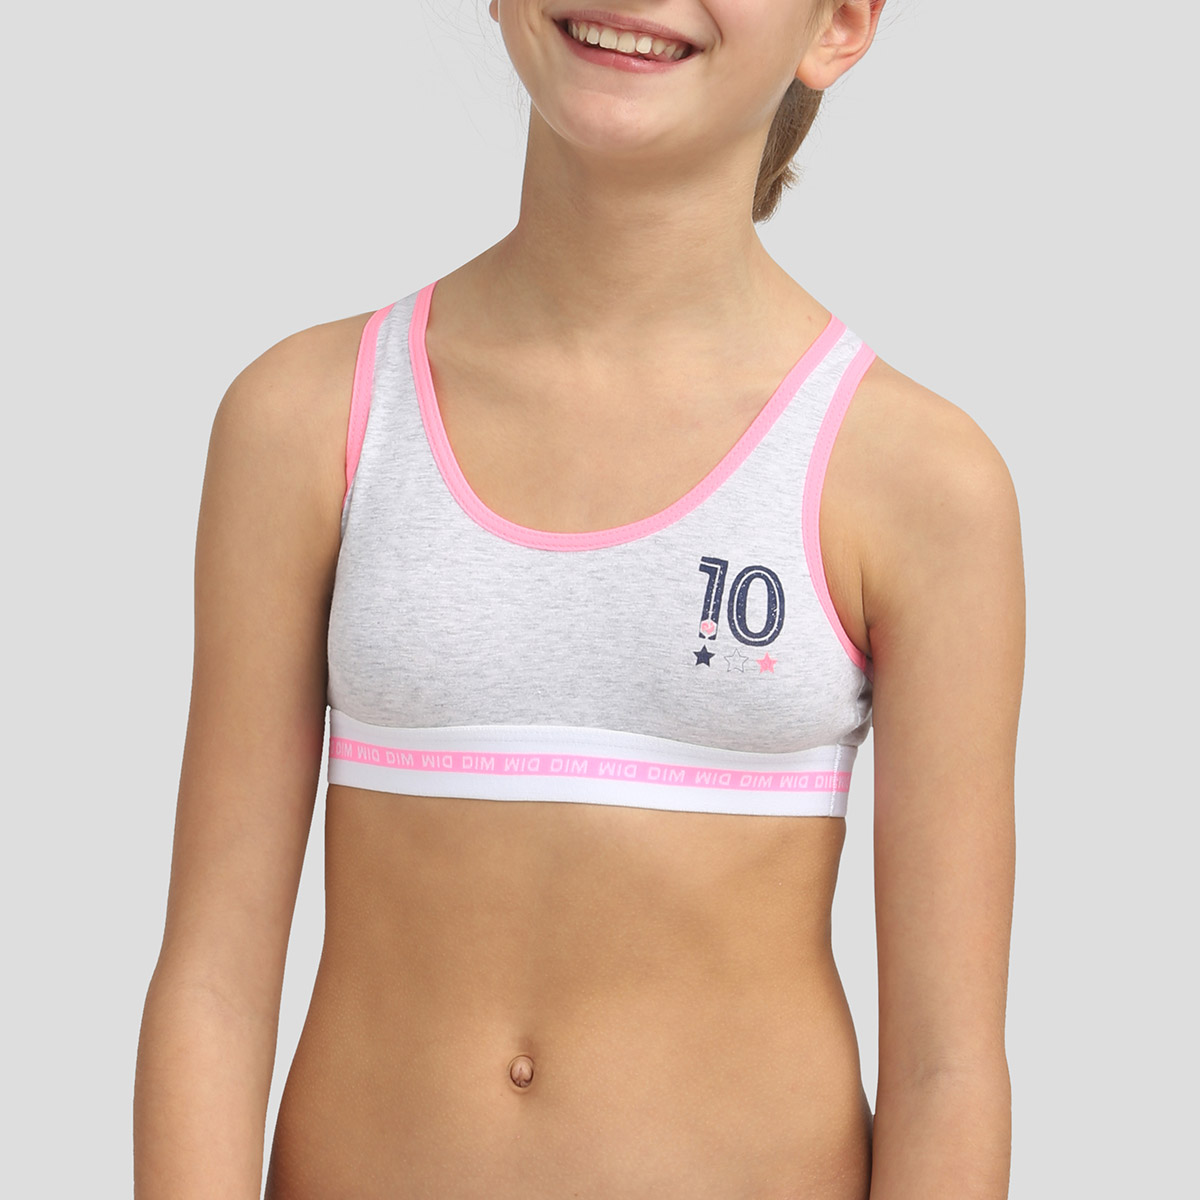 Buy MY REALMOOD Non-Padded Sports Bra (Pack of 3) (C, 34